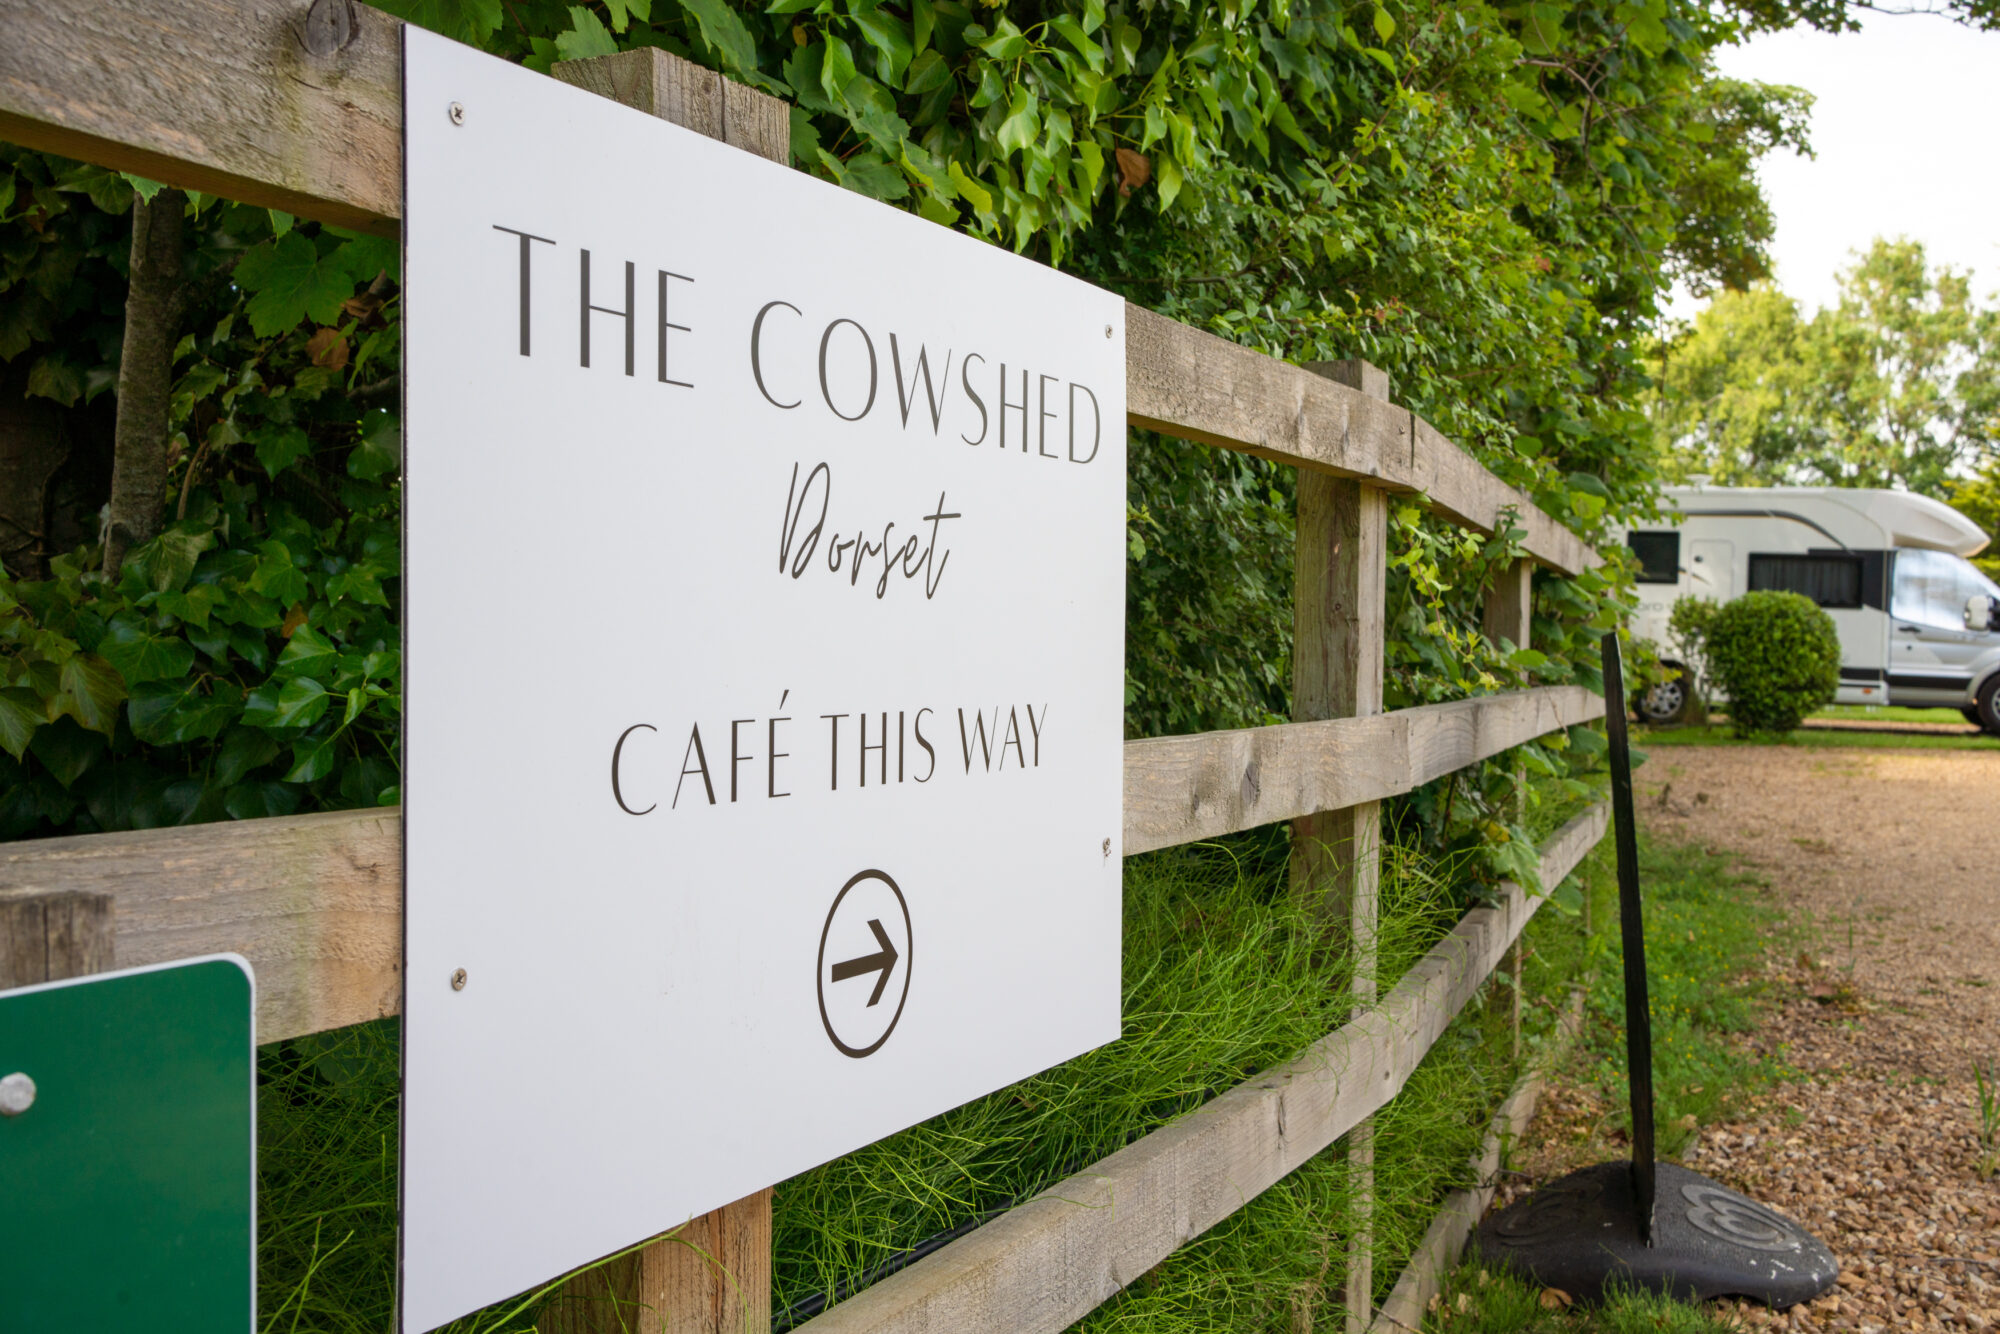 the cowshed dorset cafe thsi way sign